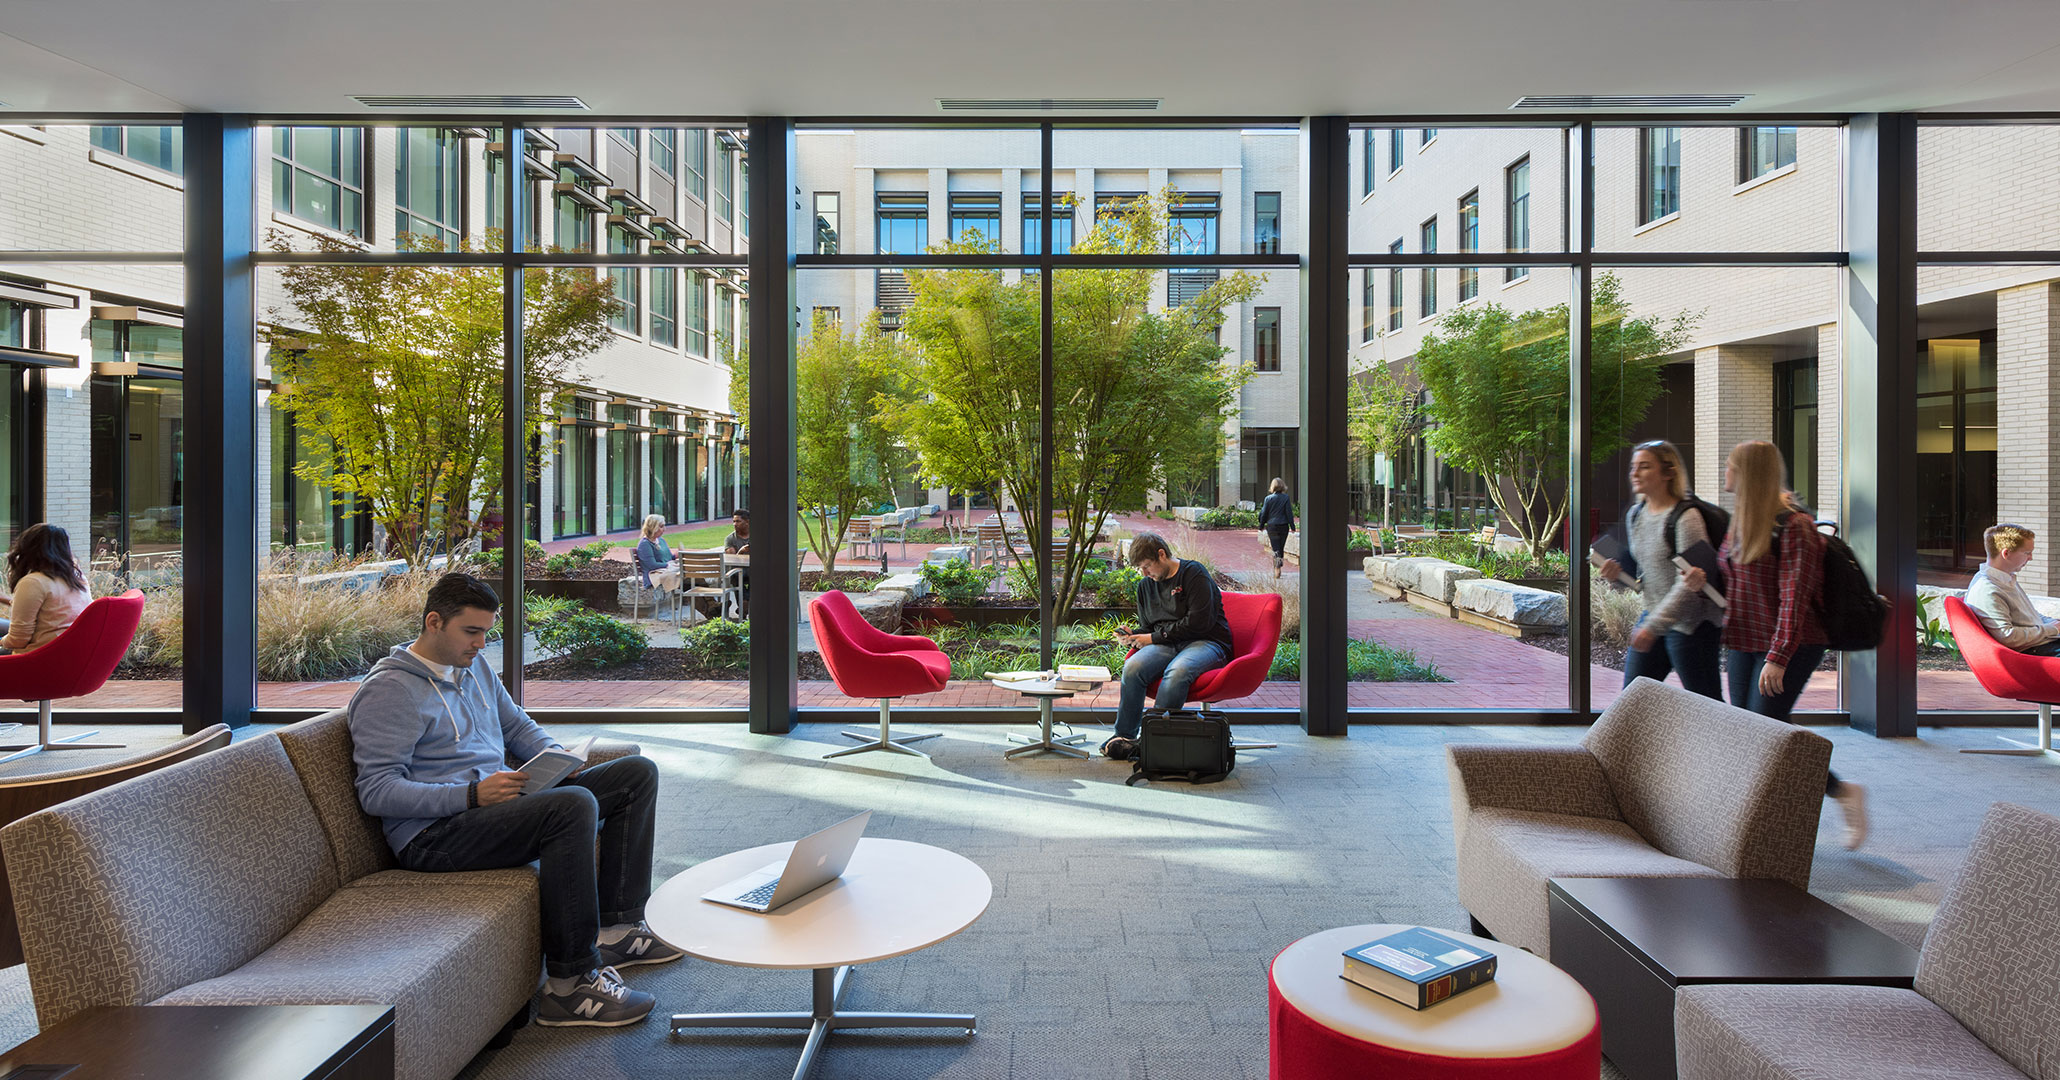 UofSC worked with Boudreaux architects to design the café space at the new Law School.